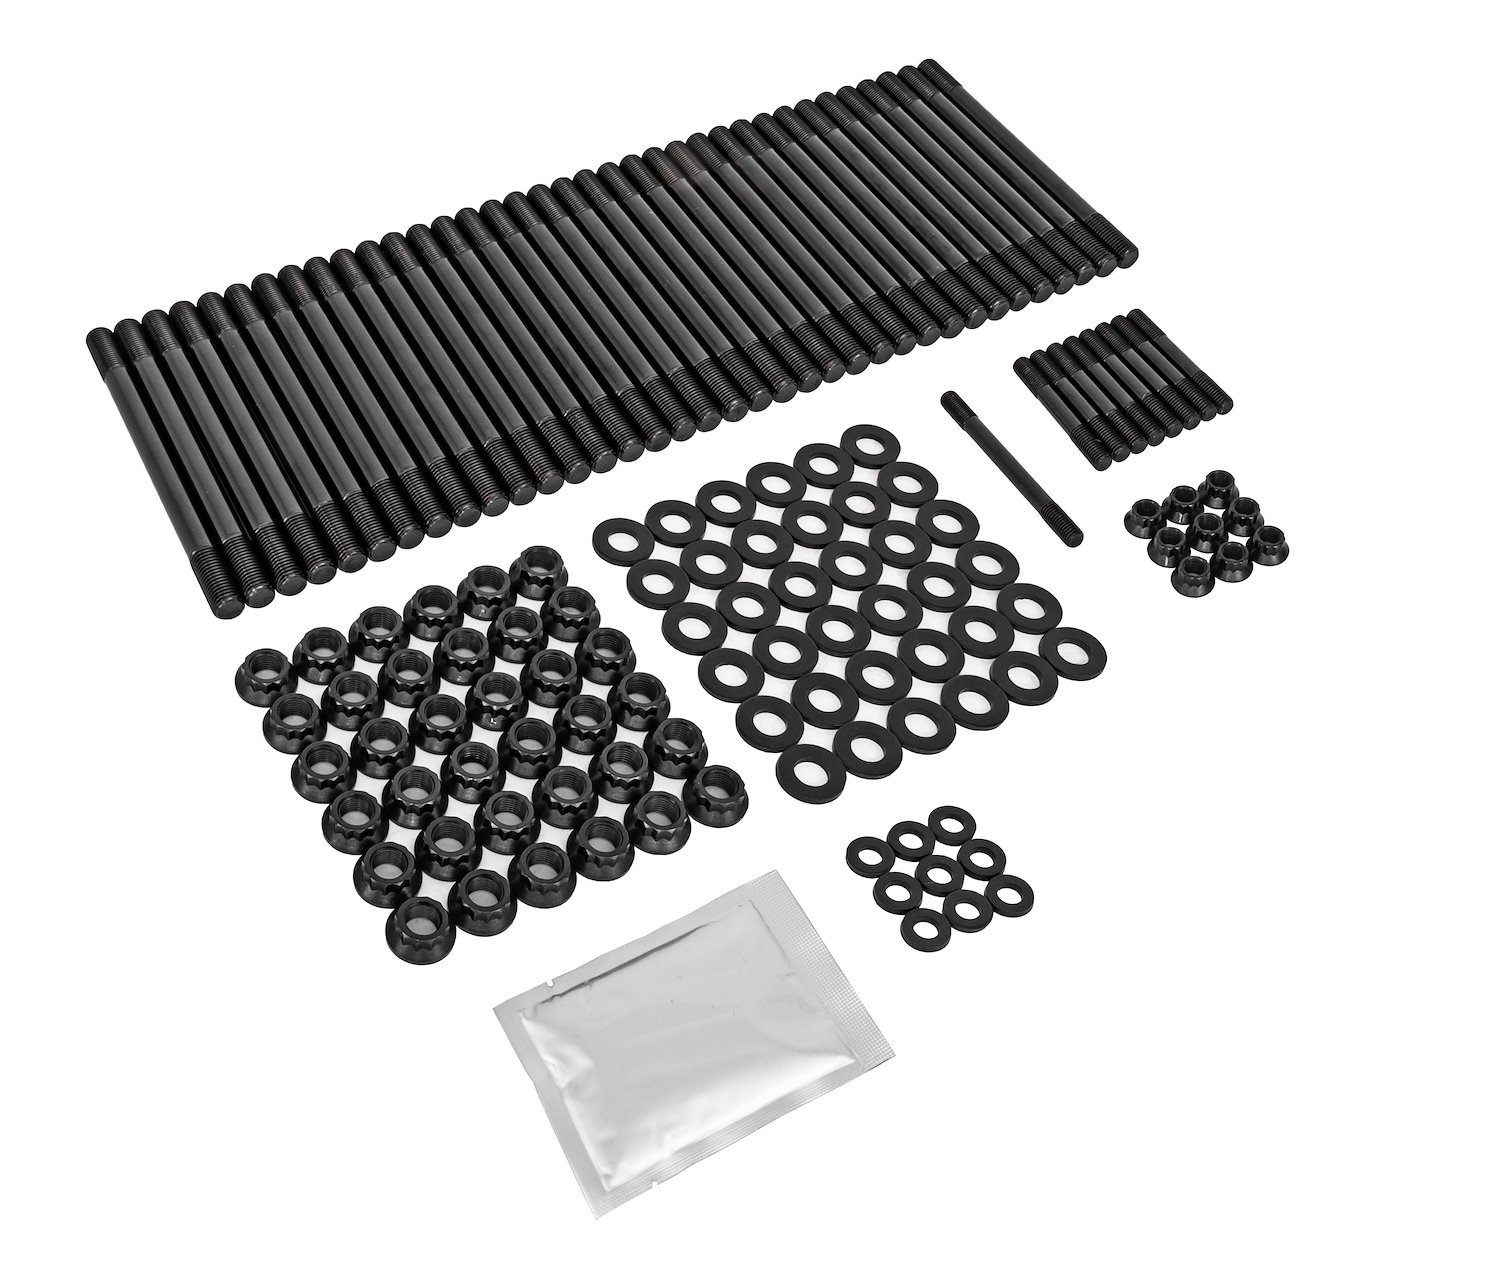 Cylinder Head Stud Kit for 2011-2015 Ford 6.7L Powerstroke Diesel Engines